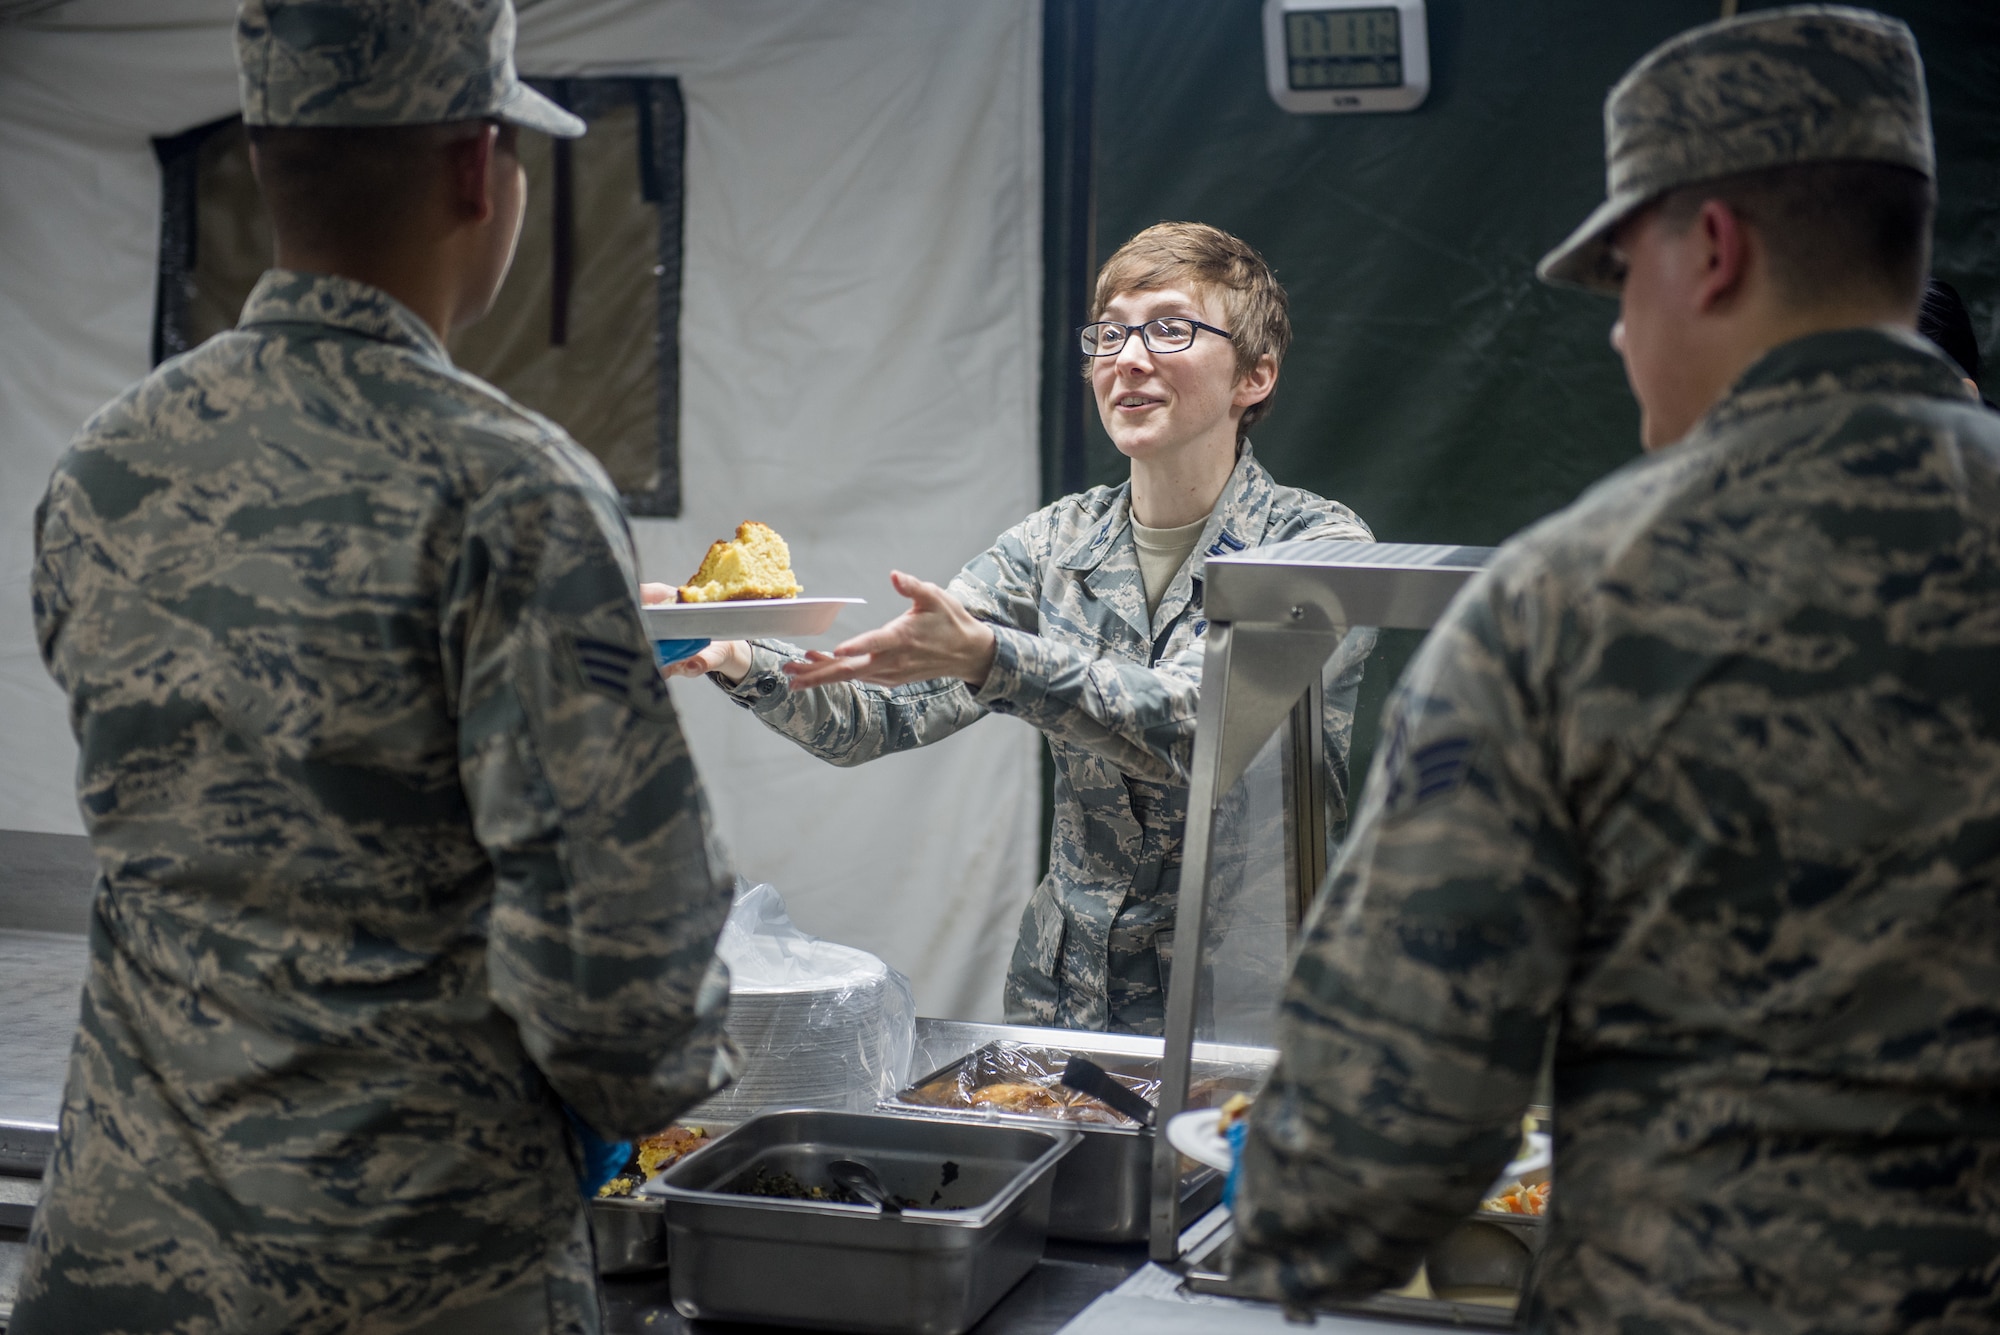 Senior Airman Ryan O’Brien, 512th Memorial Affairs food specialist, and Senior Airman Bryan Seijo, 512th MAS lodging specialist, serve meals to trainees at Dobbins Air Reserve Base, Georgia, March 9, 2019. The 512th MAS cooking team was evaluated on employee and customer relations. (U.S. Air Force photo by Staff Sgt. Damien Taylor)